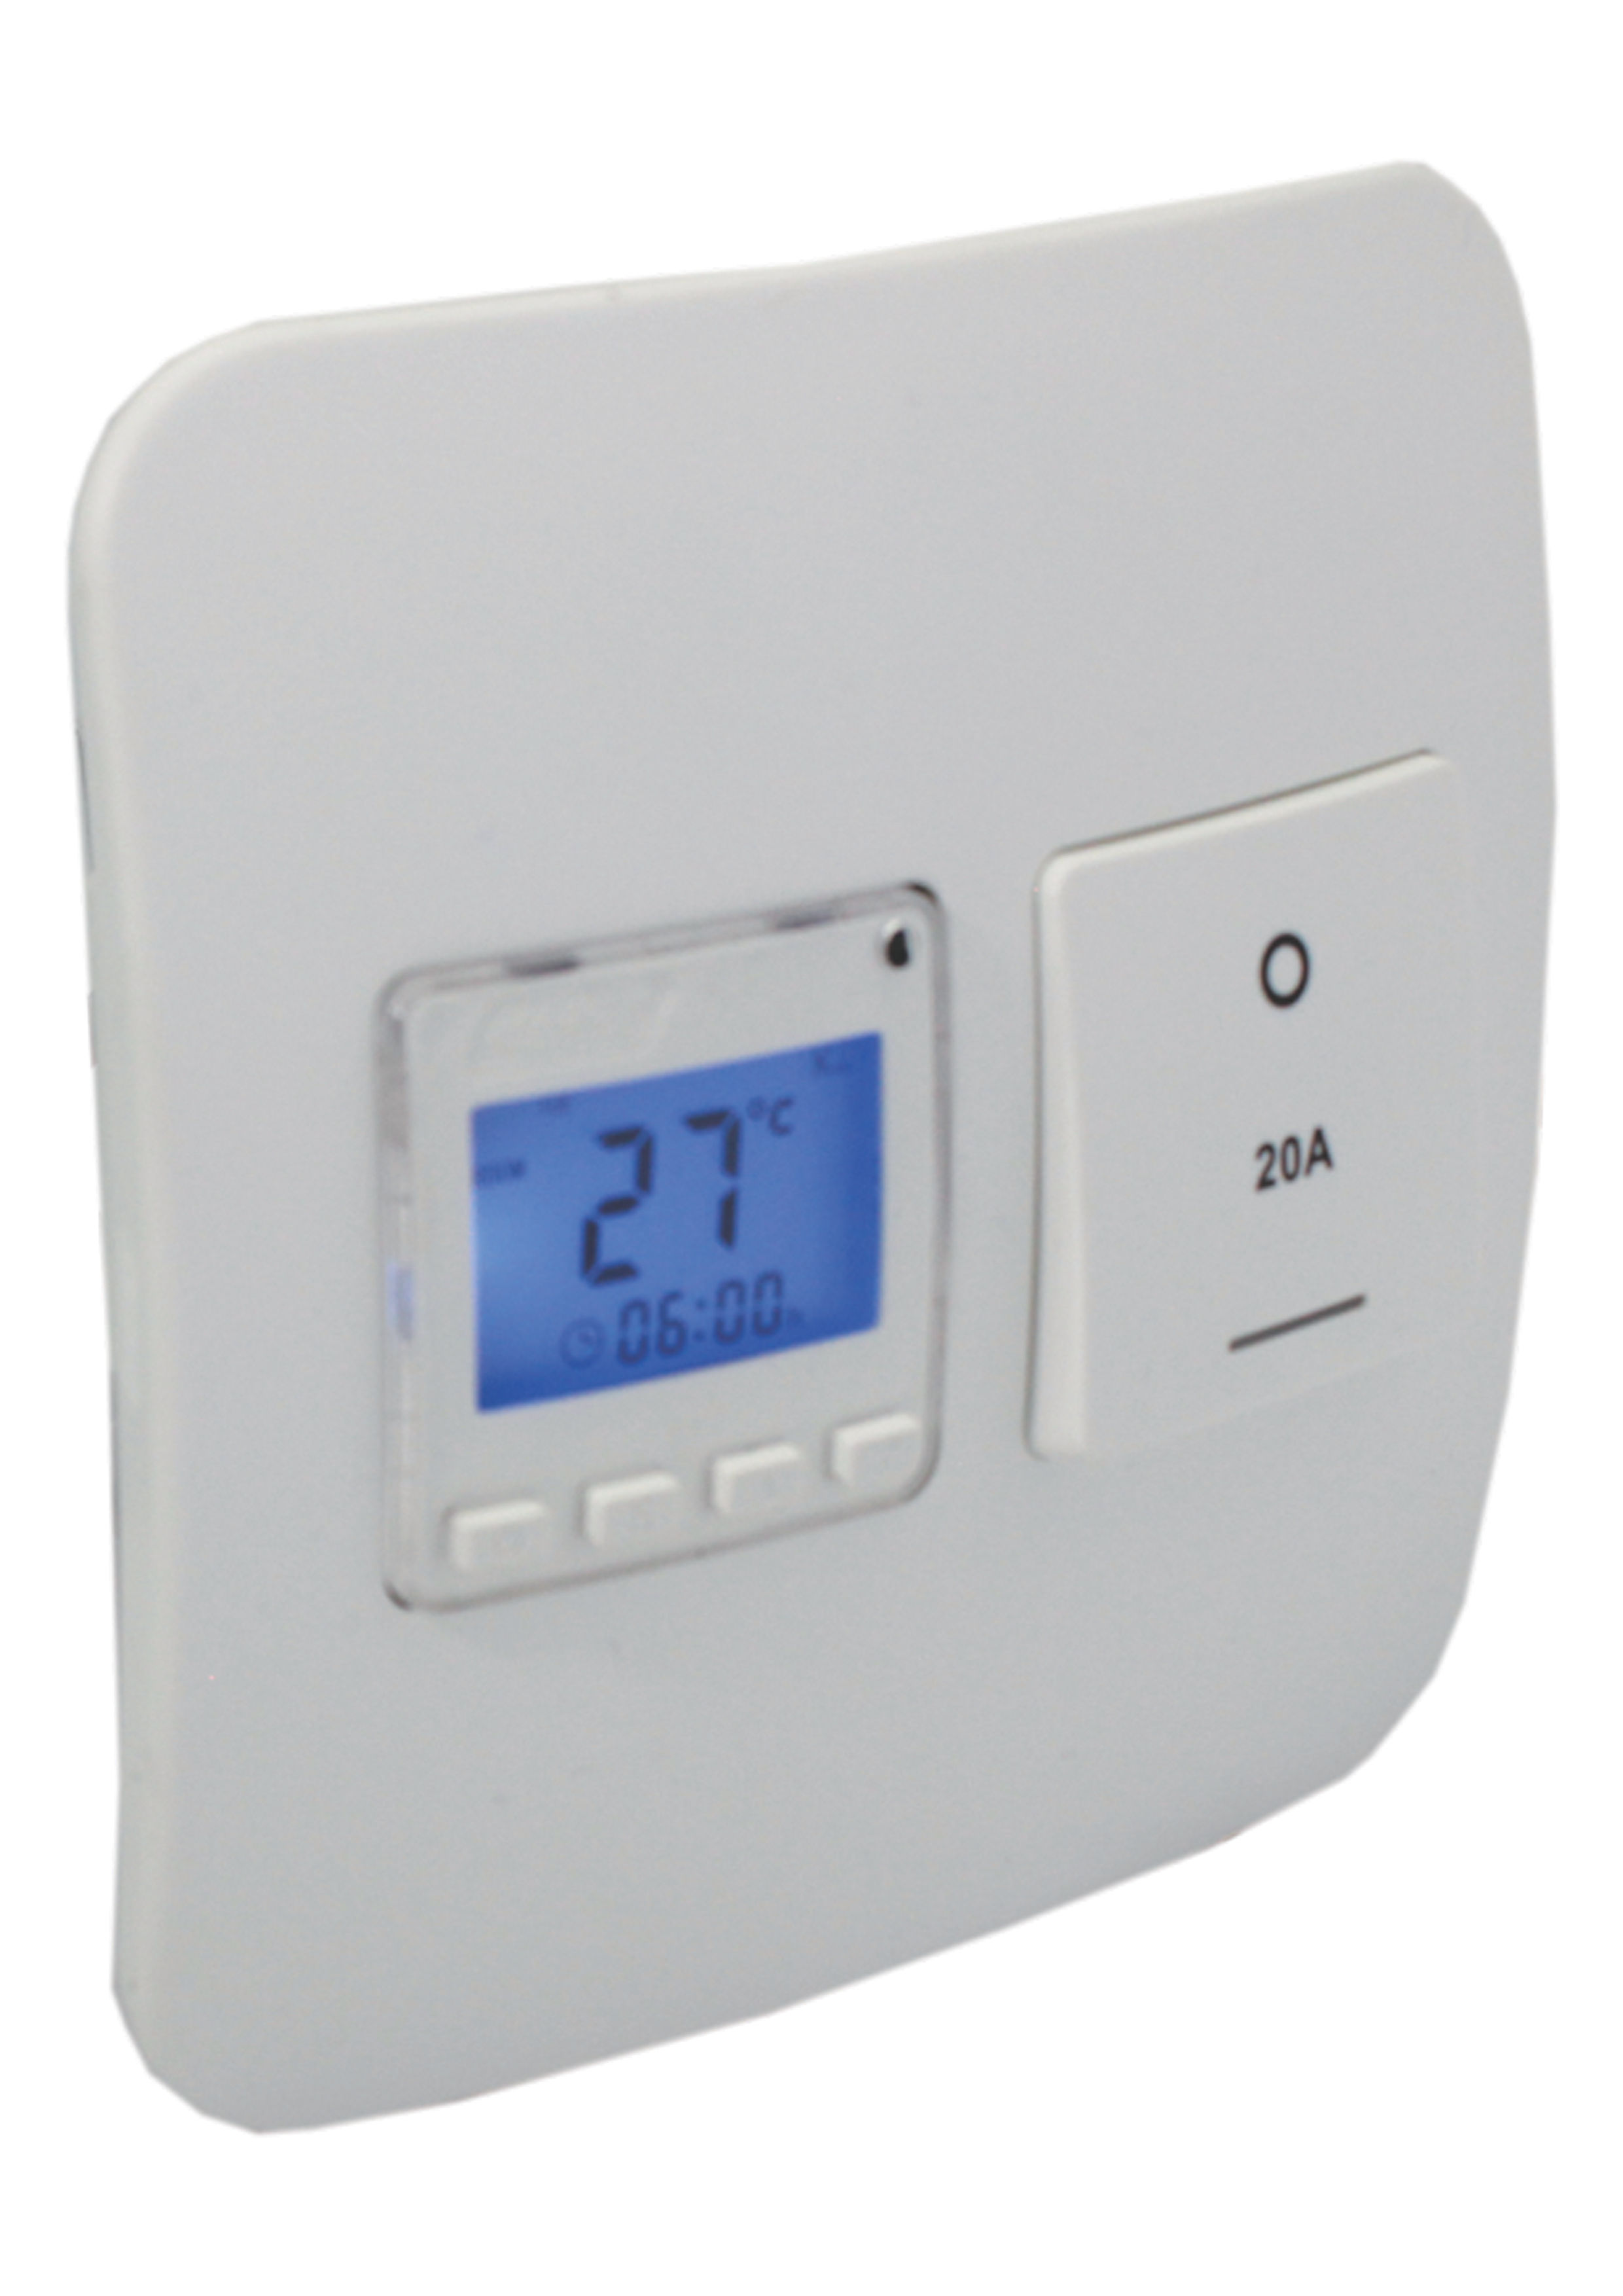 Digital Thermostat with Isolator Switch (Thermo1wwt) - VETi